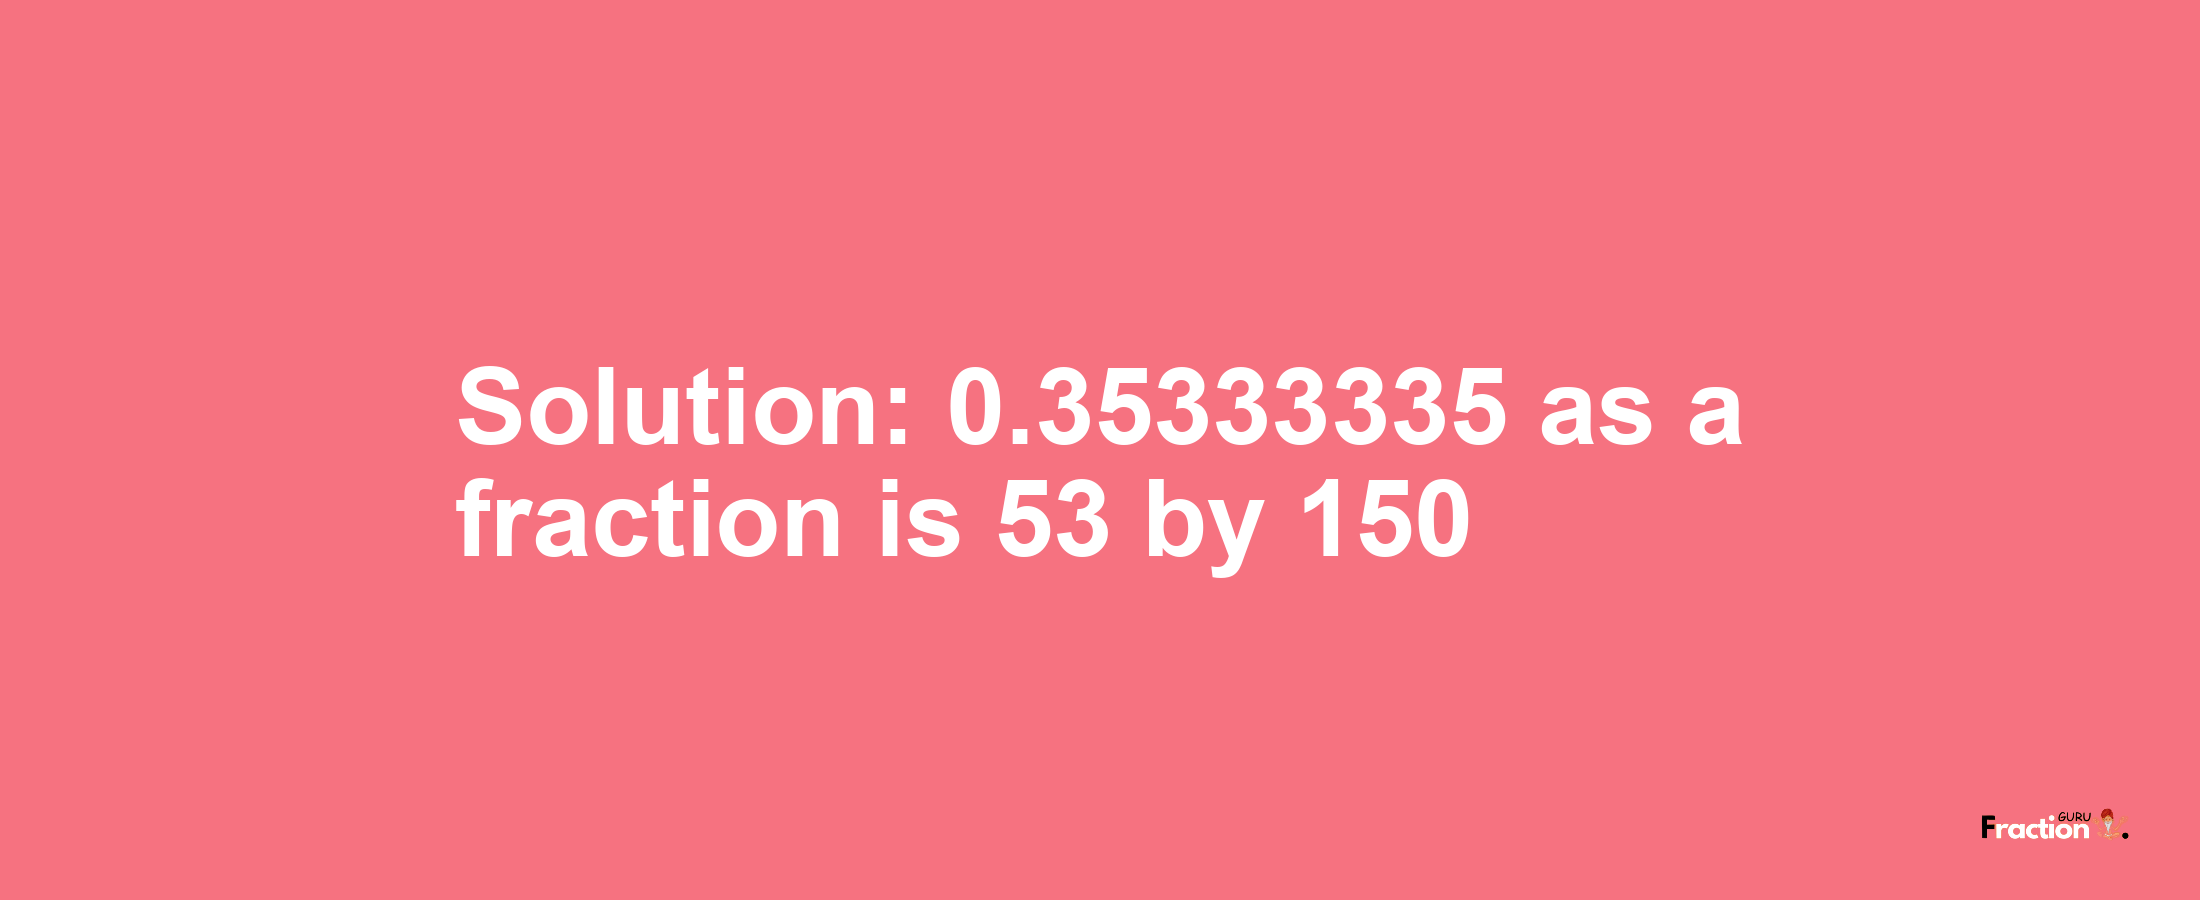 Solution:0.35333335 as a fraction is 53/150